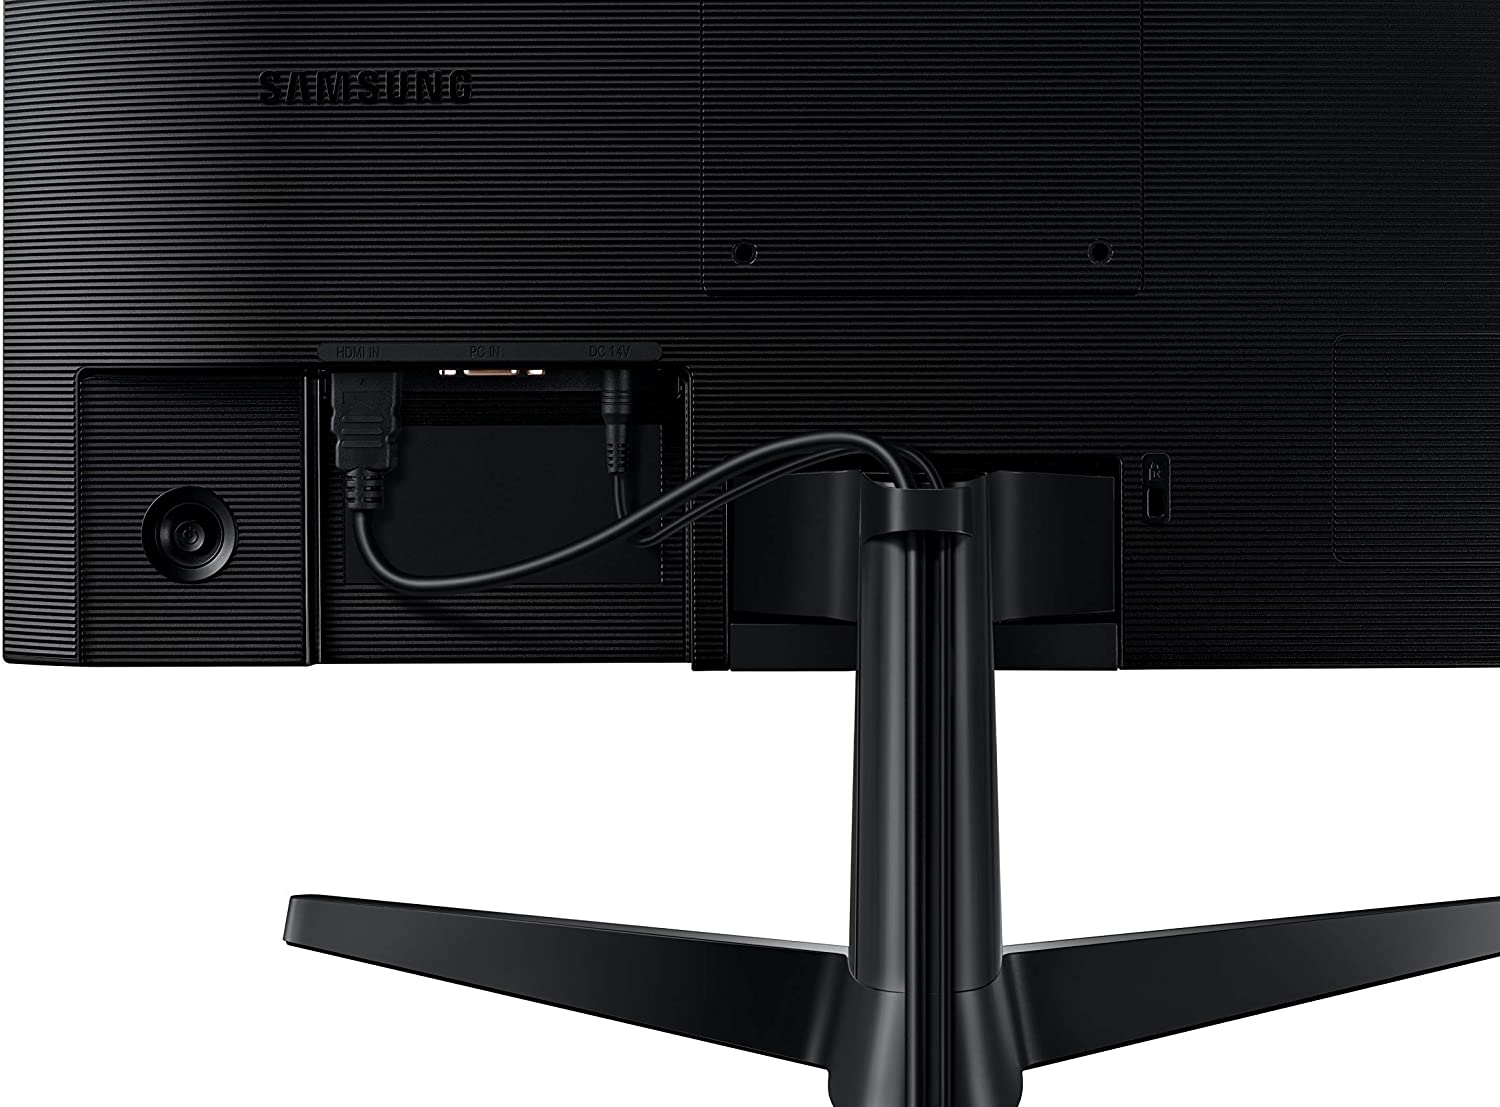 SAMSUNG 27-inch T35F LED Monitor with Border-Less Design, IPS Panel, 75hz, FreeSync, and Eye Saver Mode (LF27T350FHNXZA)